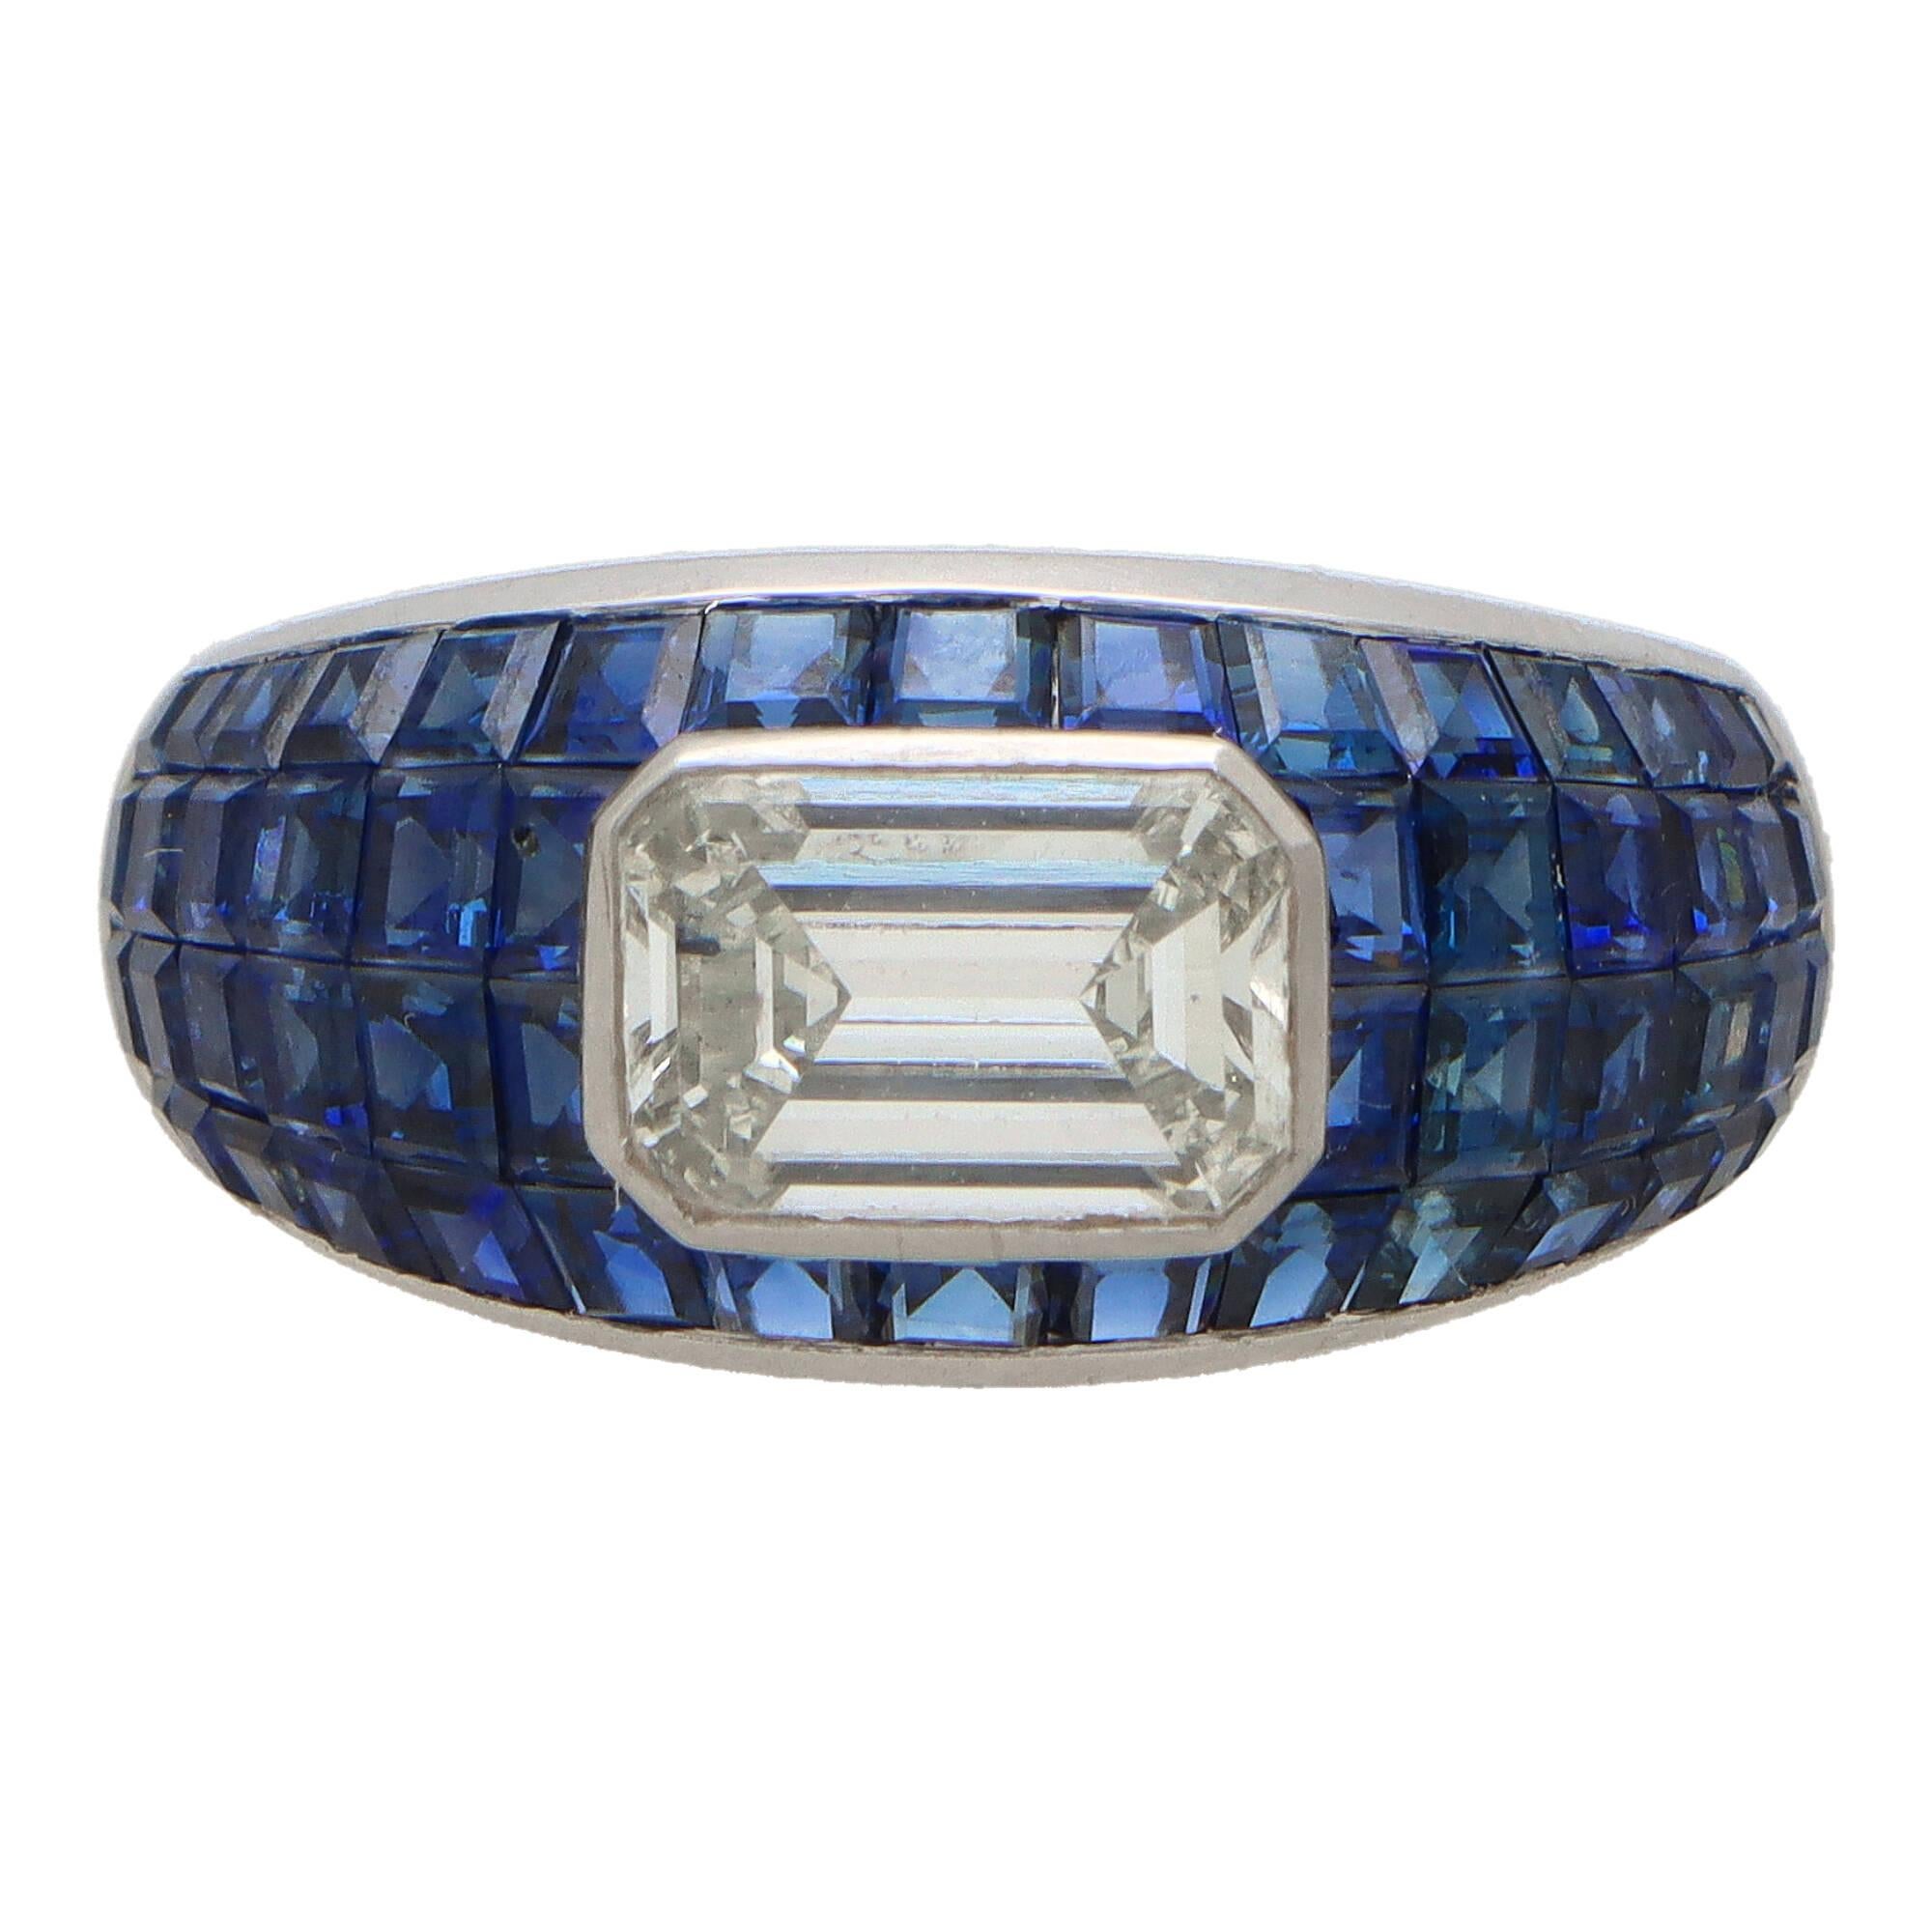 Art Deco Inspired Emerald Cut Diamond and Blue Sapphire Bombe Dress Ring  In Excellent Condition For Sale In London, GB